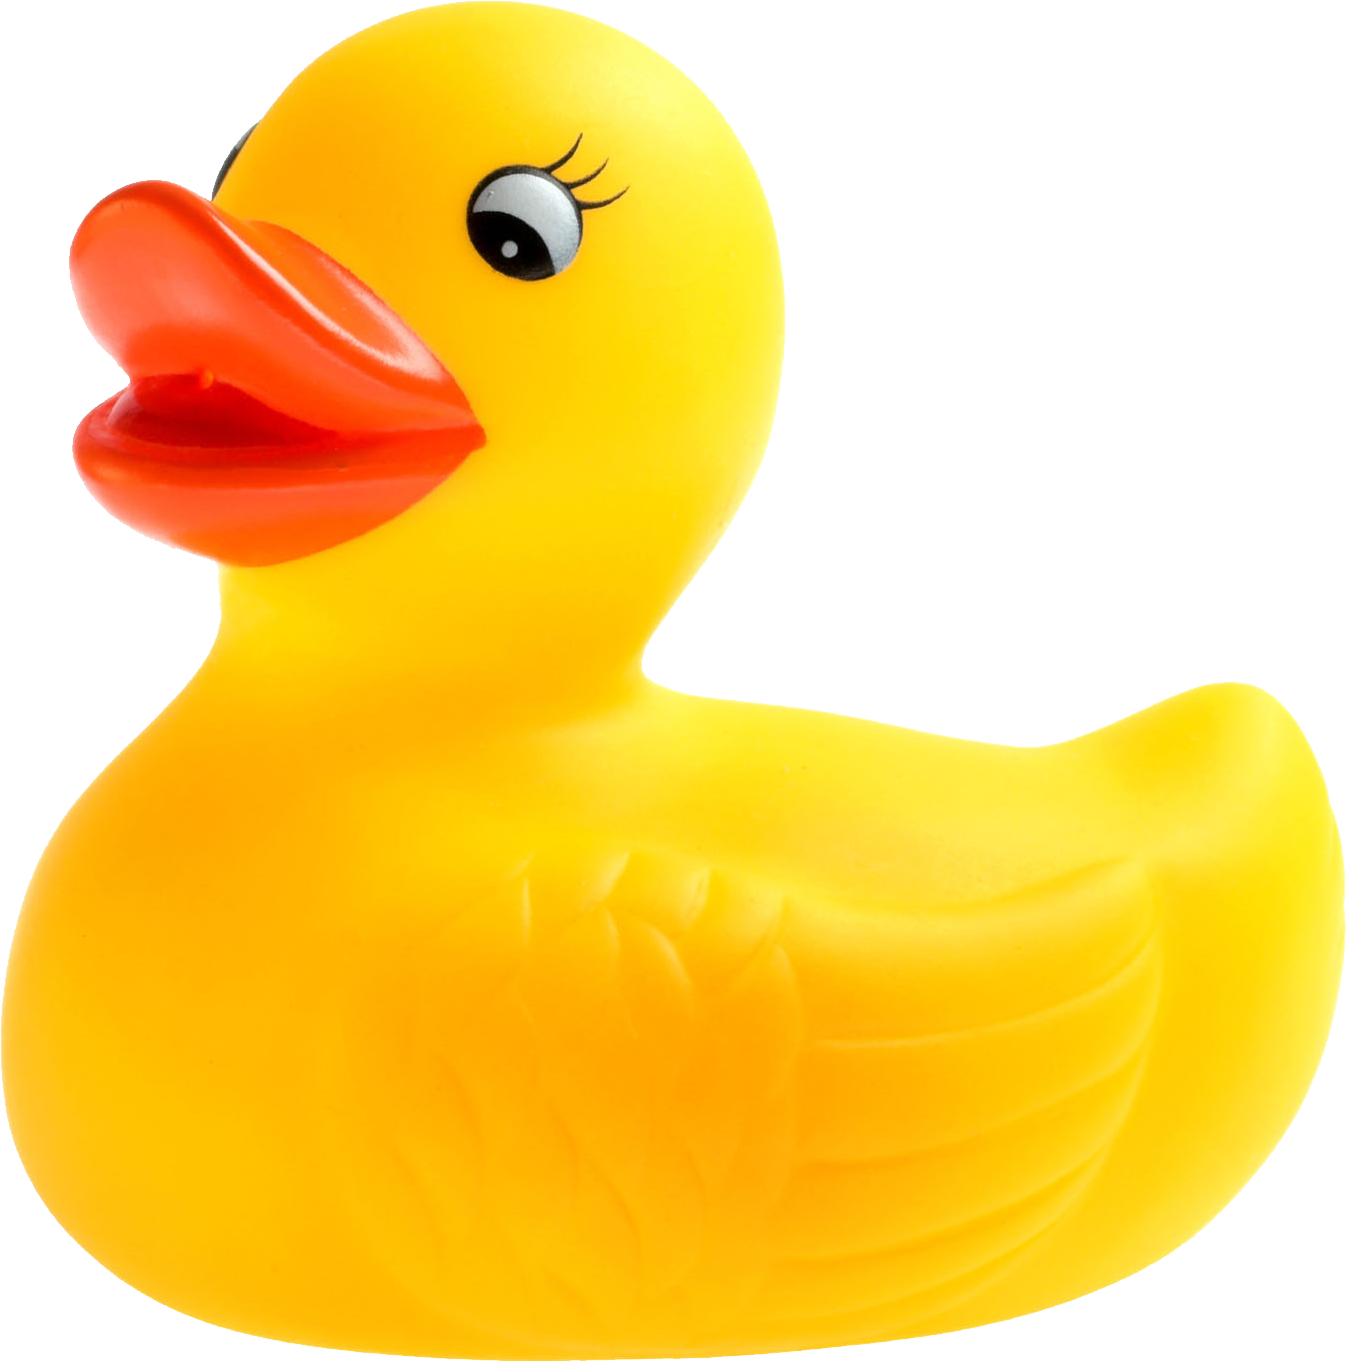 Rubber Duck PNG HD Photos